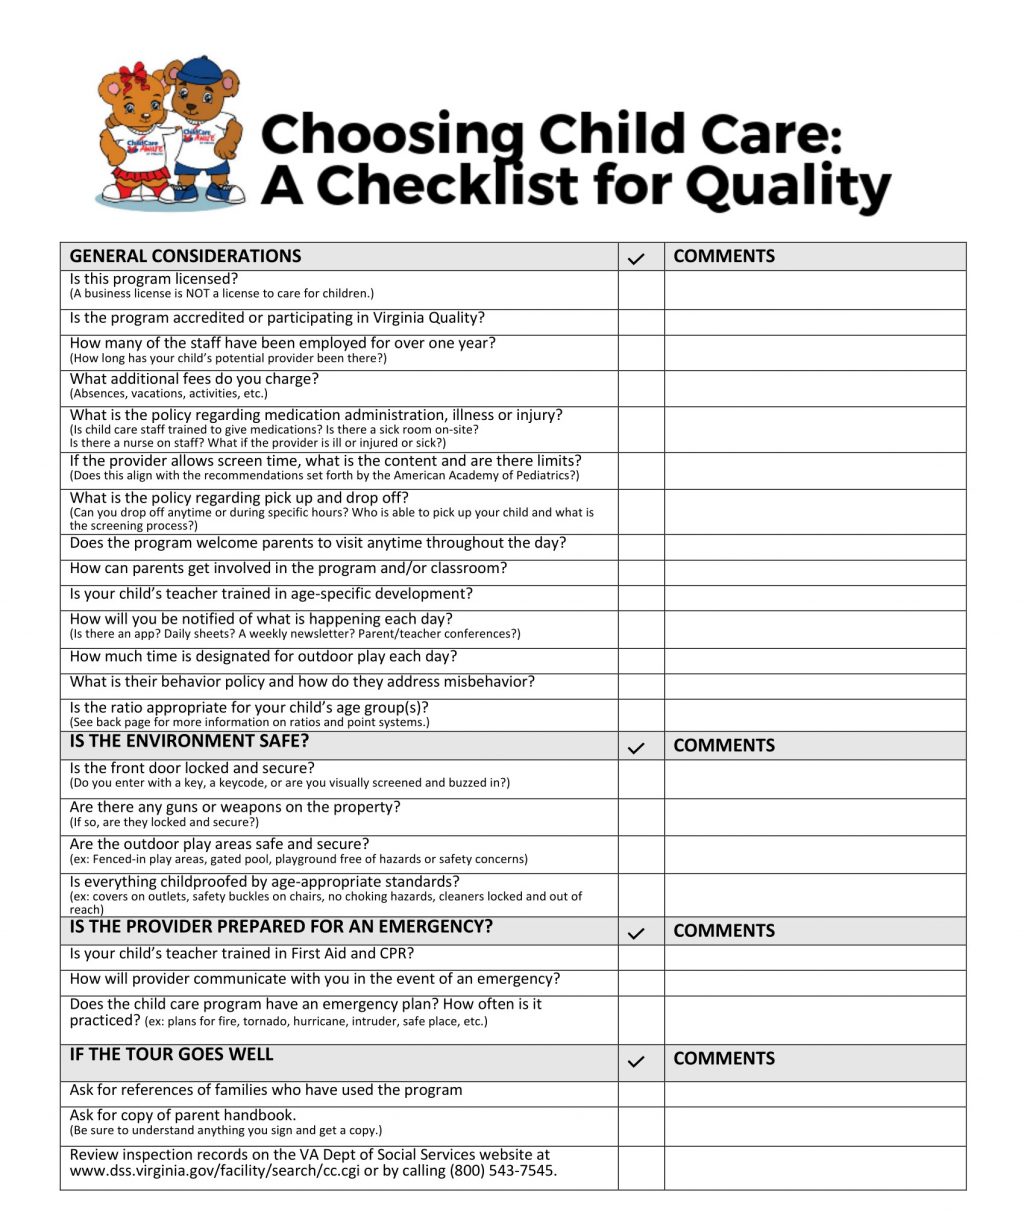 Be Prepared: Emergency Preparation Checklist for Families with Infants and  Young Children, Nutrition